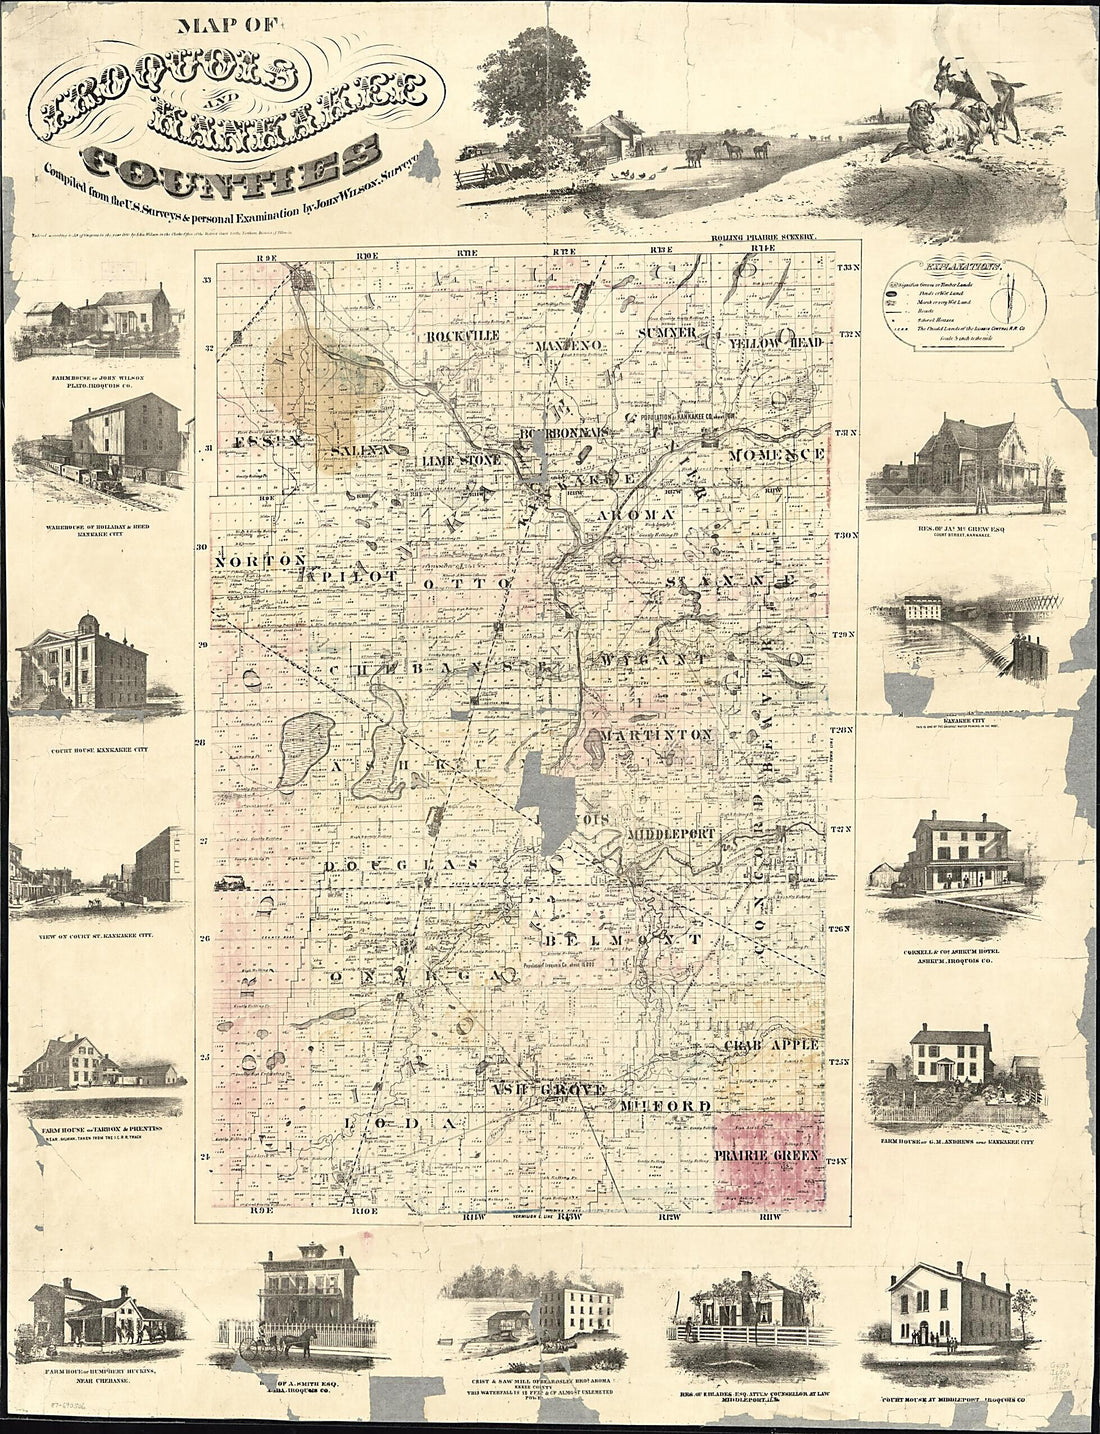 This old map of Map of Iroquois and Kankakee Counties from 1860 was created by John Wilson in 1860